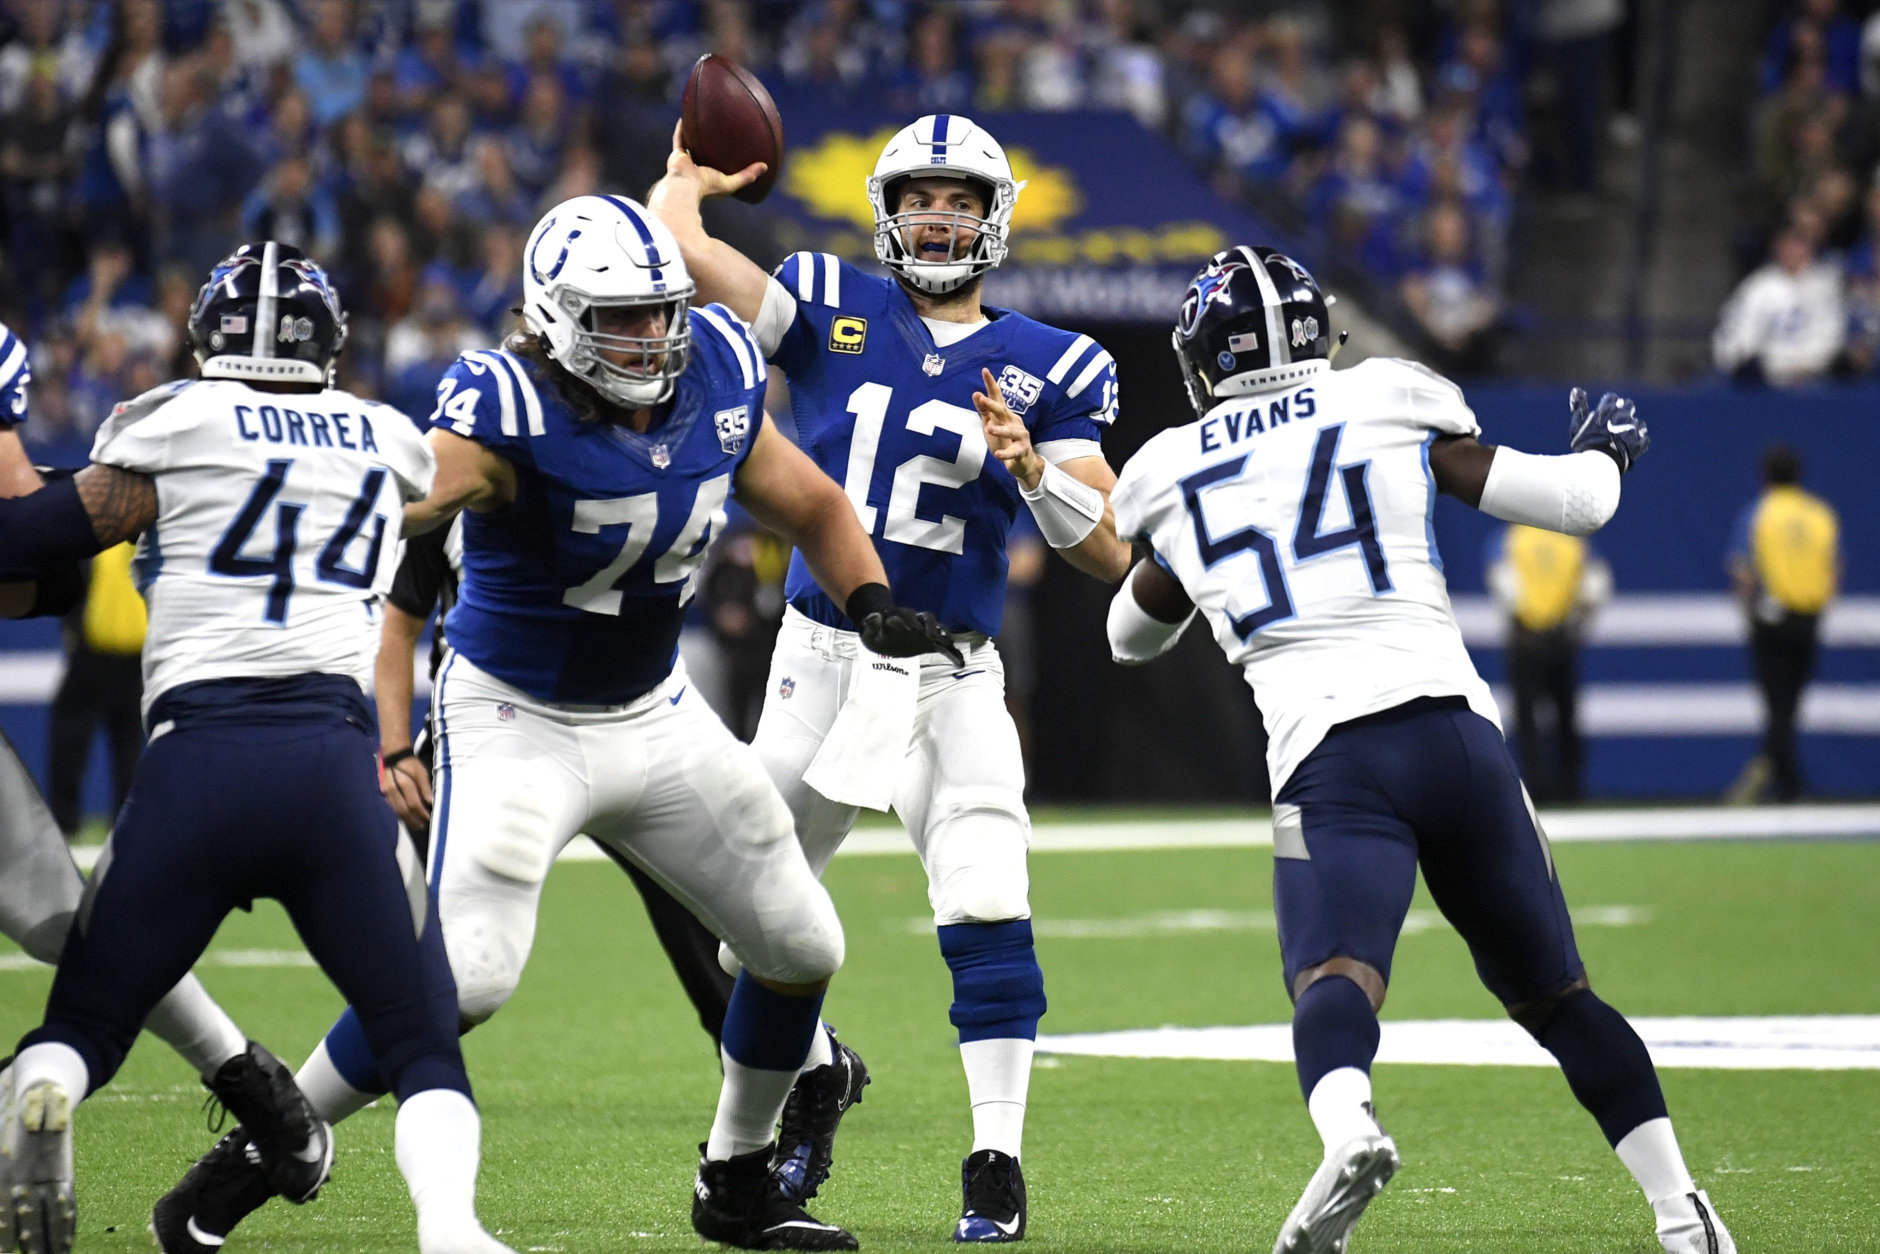 INDIANAPOLIS, INDIANA - NOVEMBER 18: Andrew Luck #12 of the Indianapolis Colts throws a pass down field in the game against the Tennessee Titans in the third quarter at Lucas Oil Stadium on November 18, 2018 in Indianapolis, Indiana. (Photo by Bobby Ellis/Getty Images)